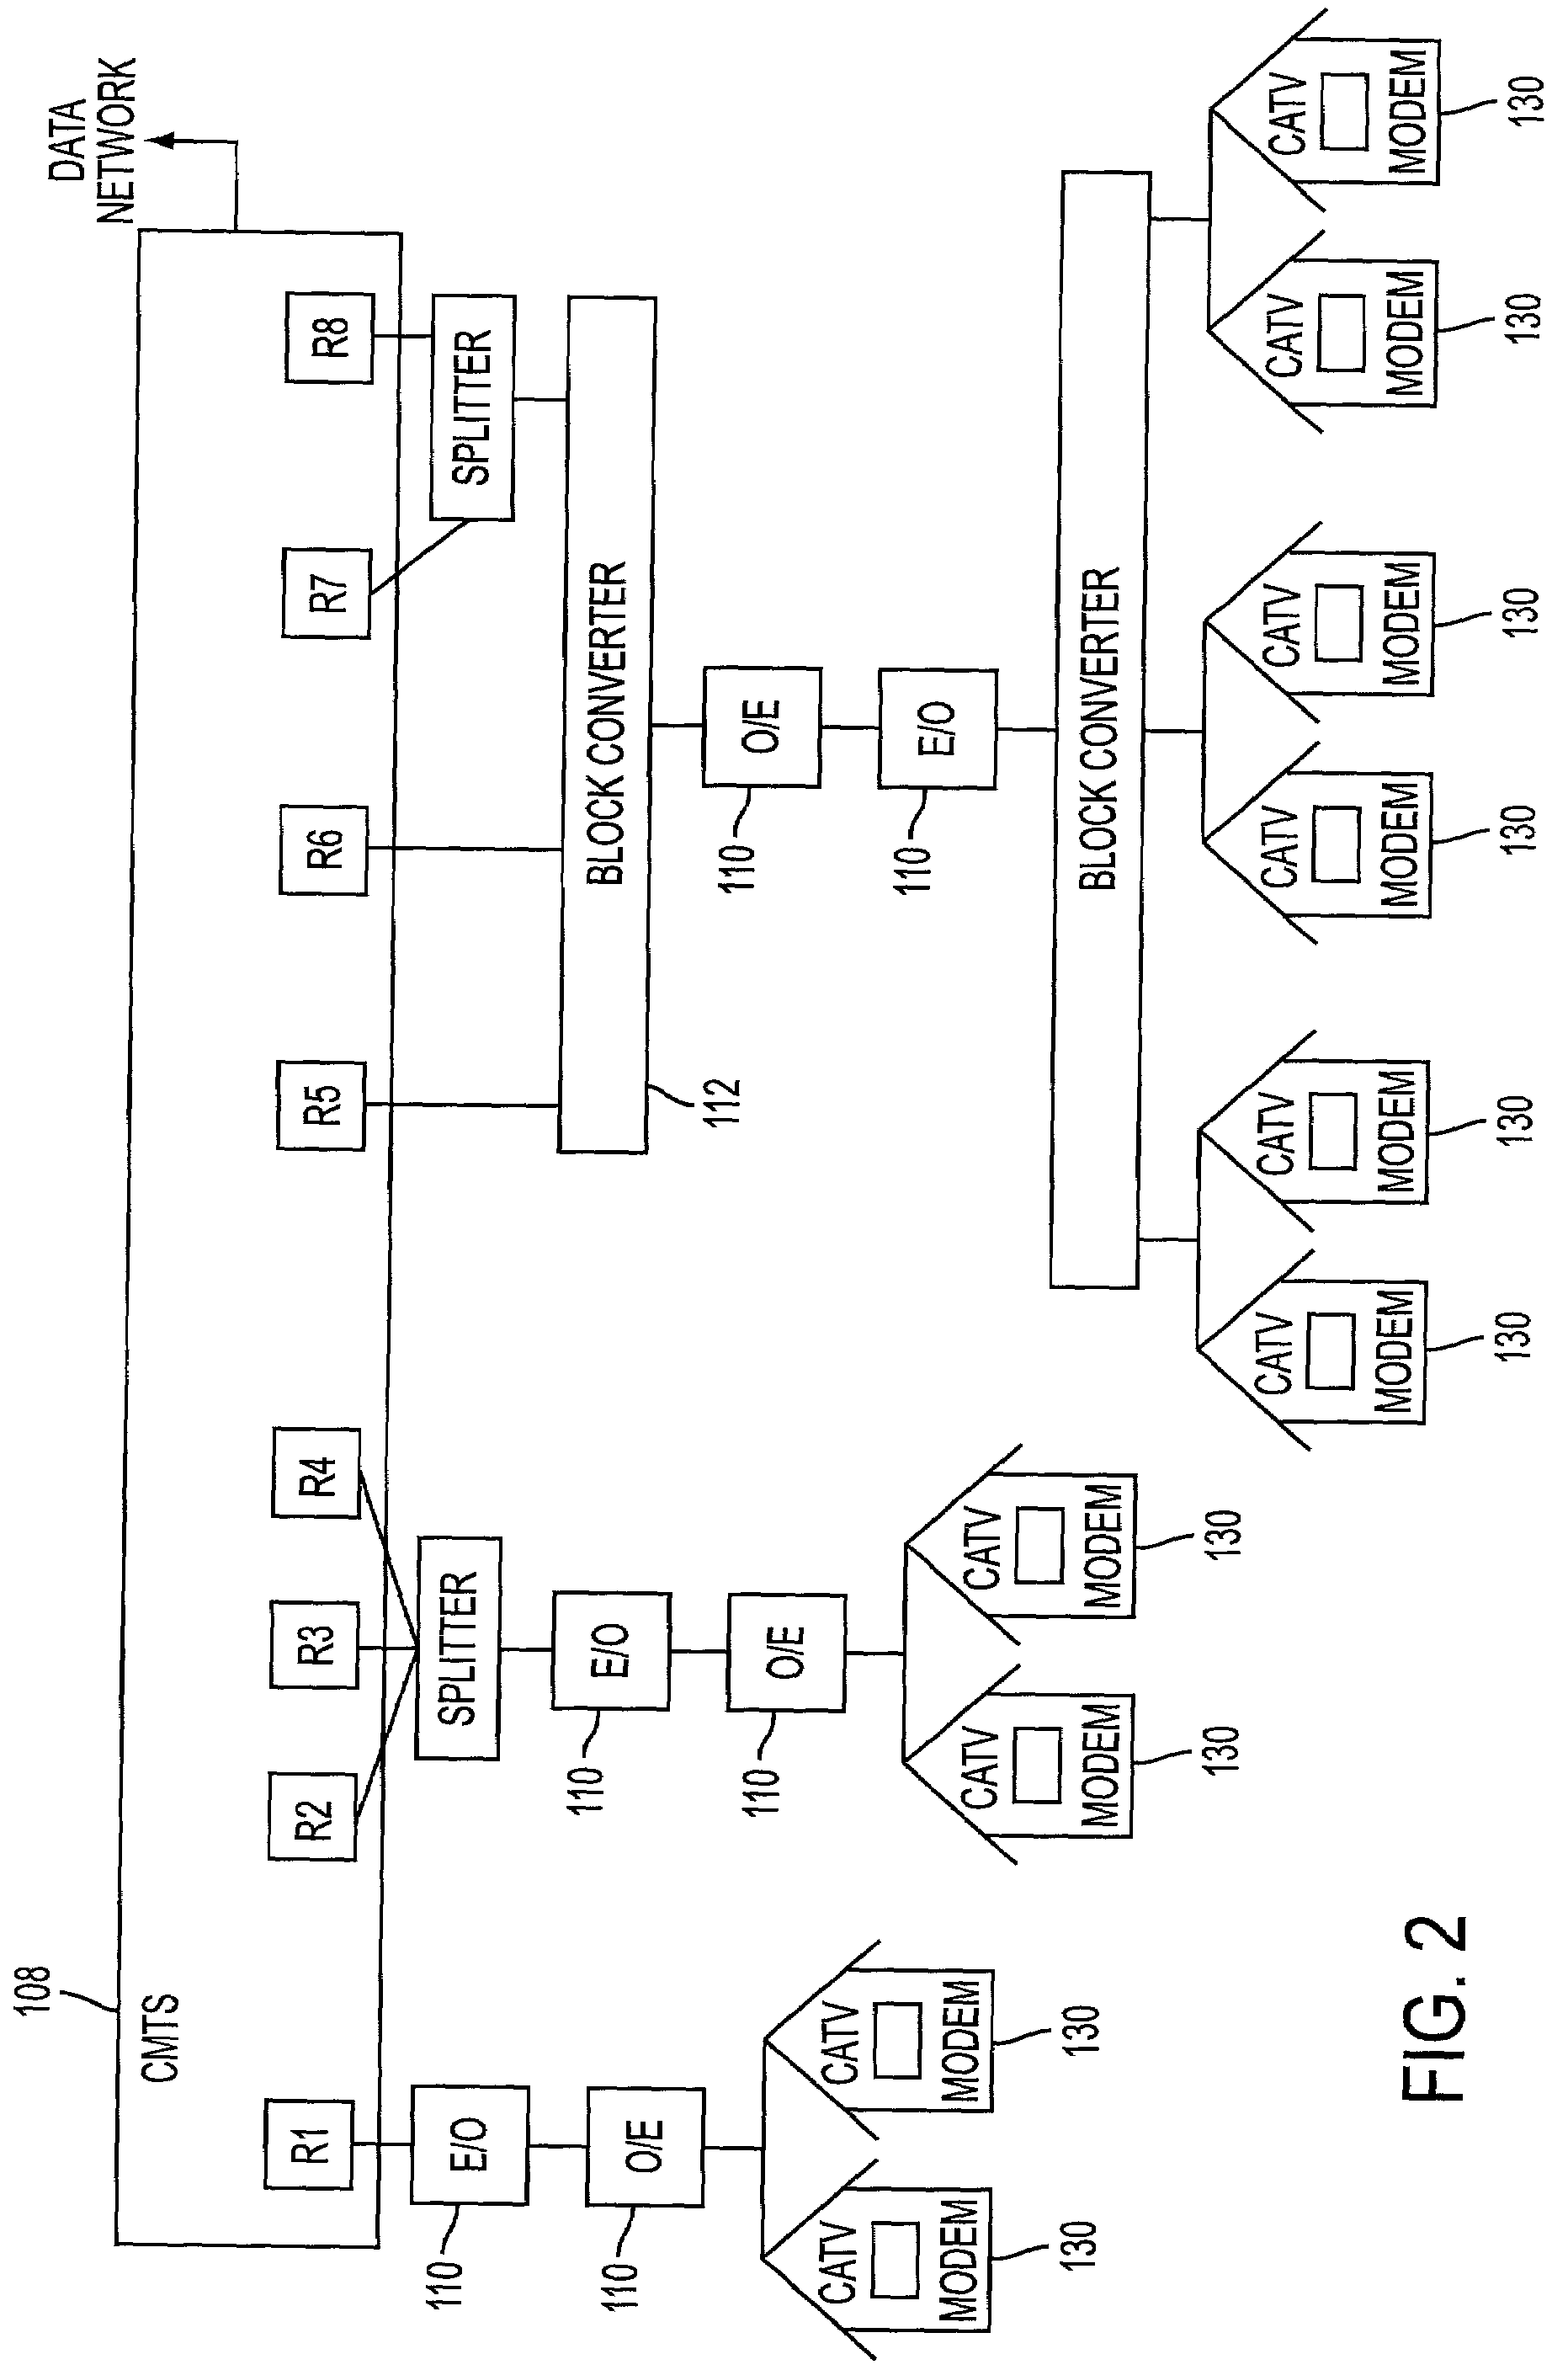 System and method for multiplexing broadband signals